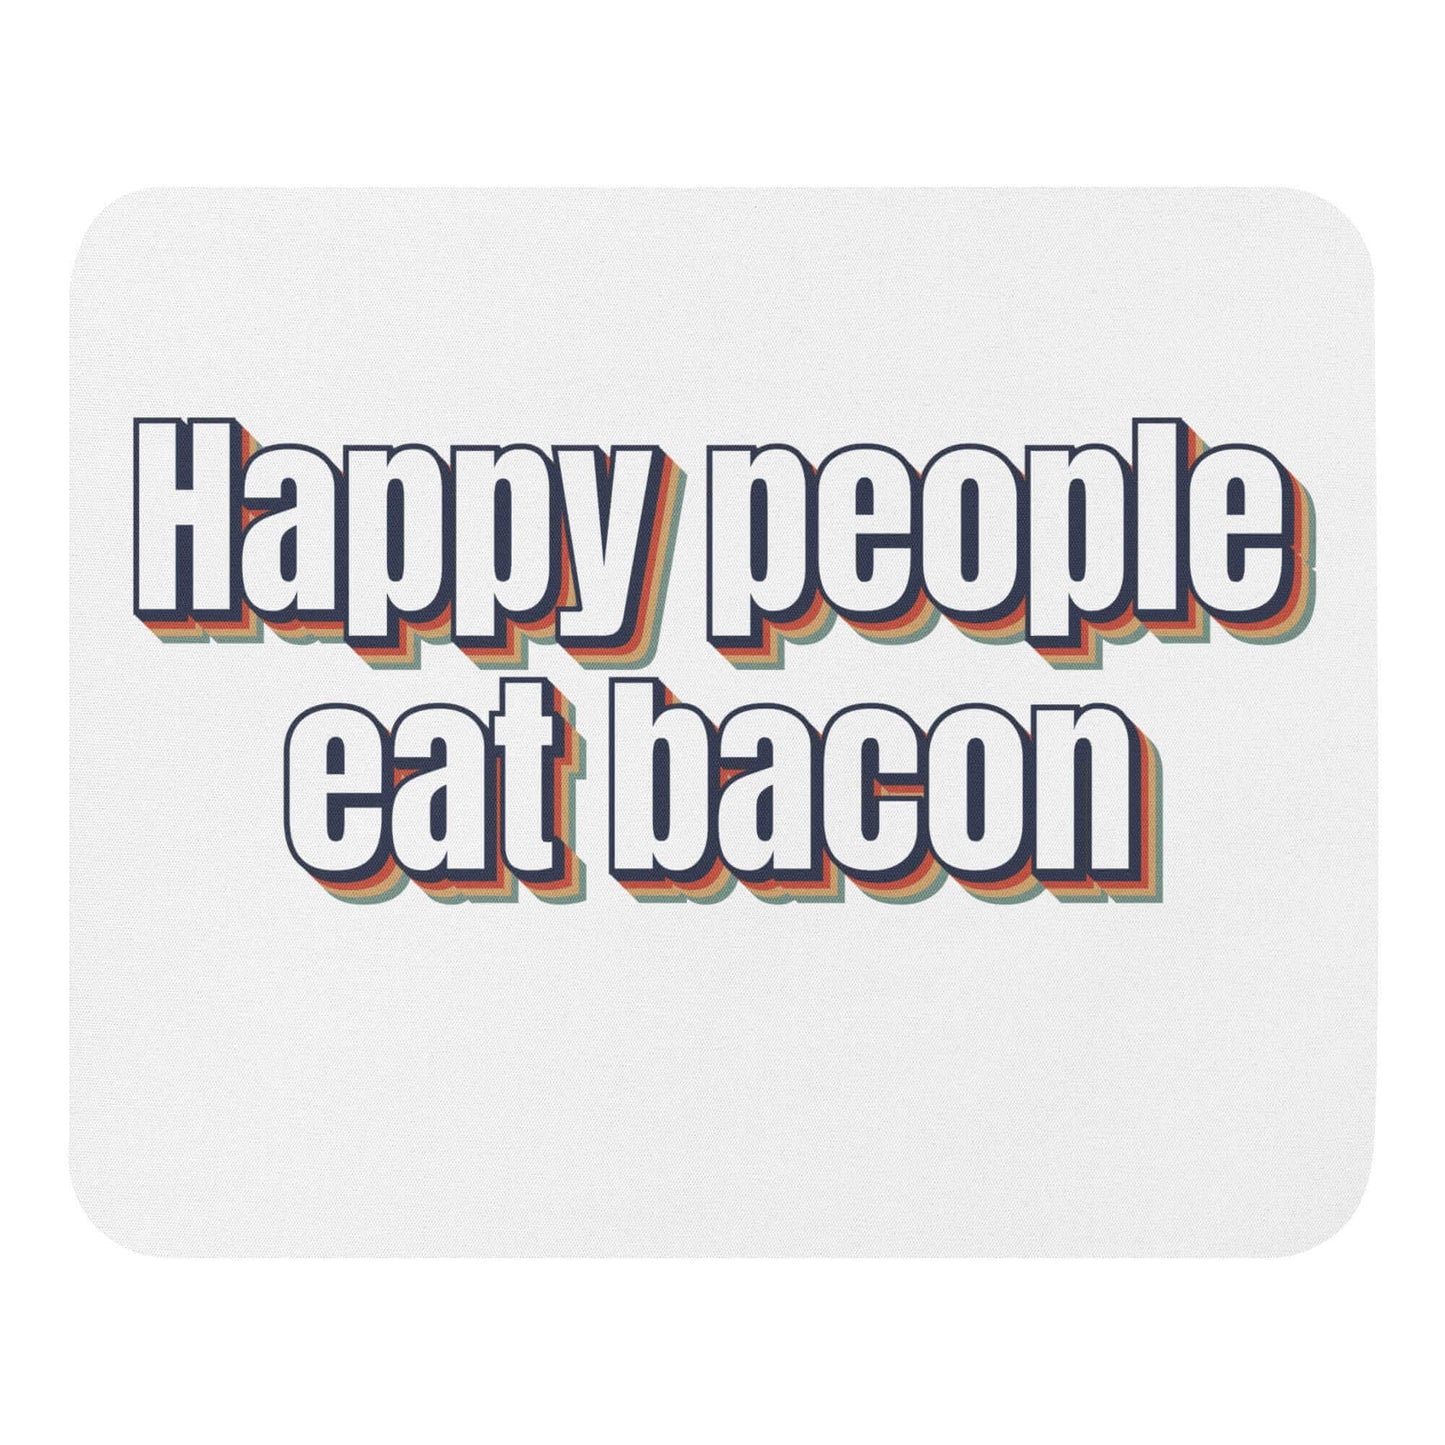 Happy people eat bacon - Mouse pad - Horrible Designs